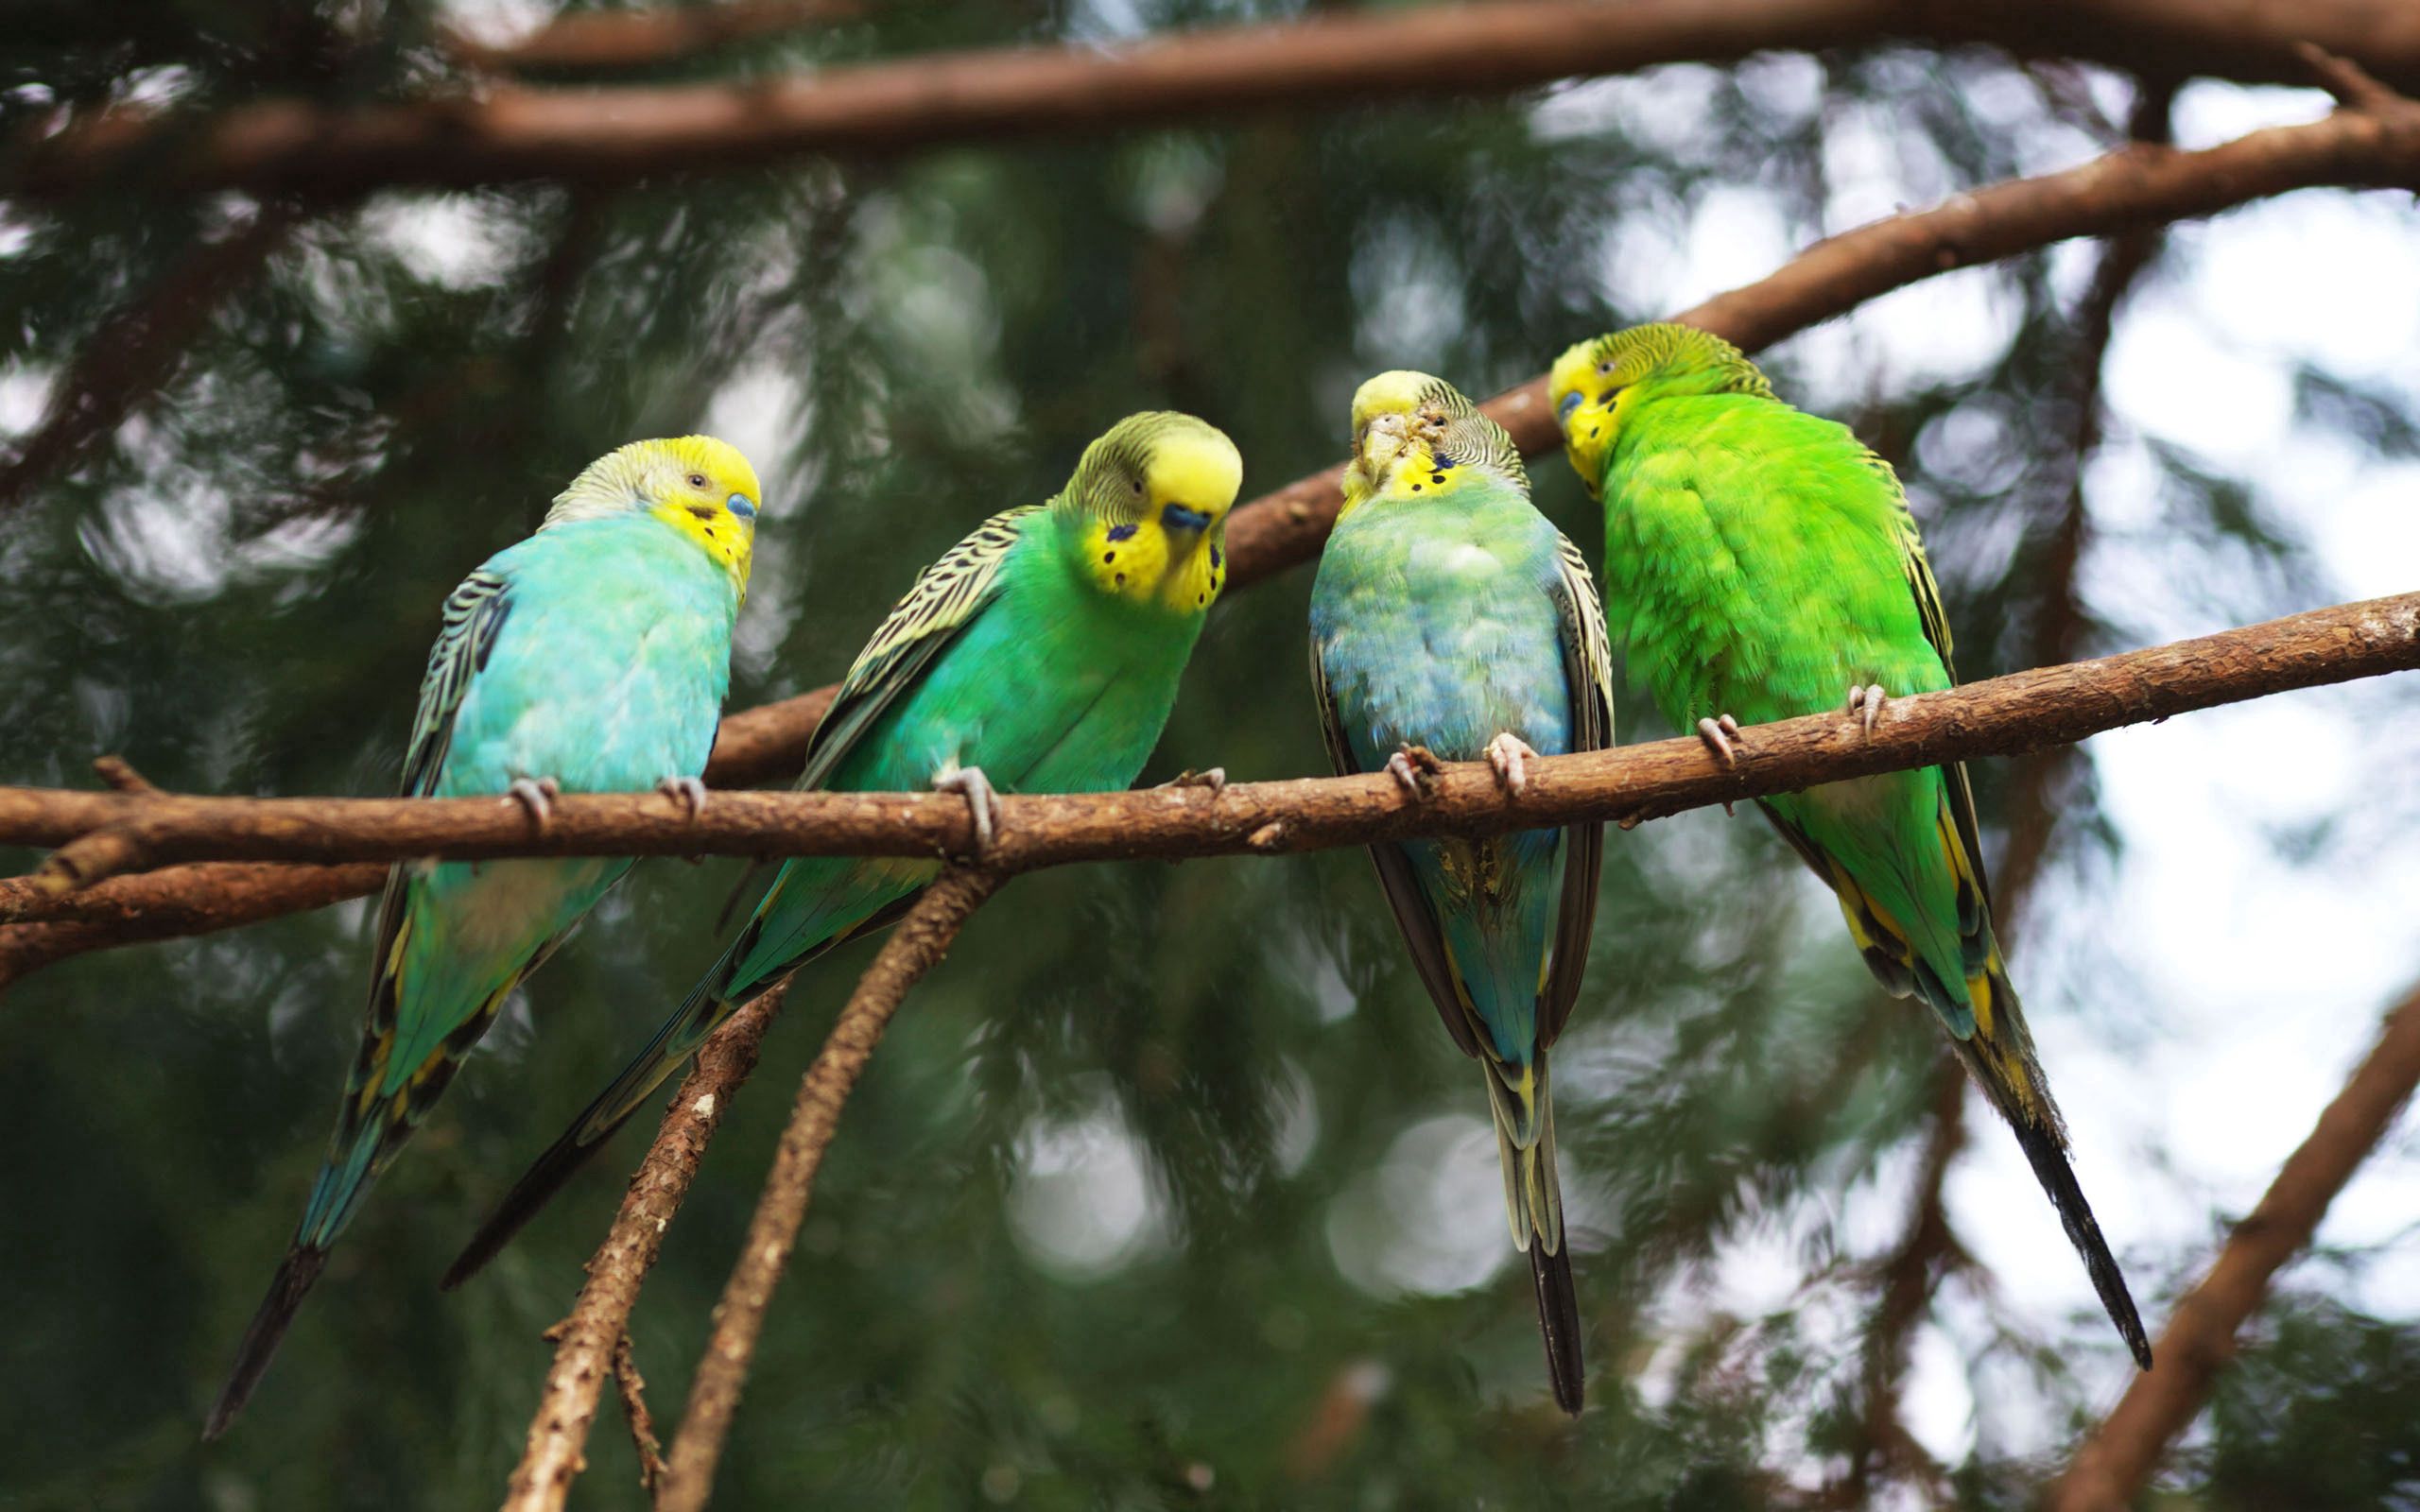 New Lock Screen Wallpapers animals, birds, parrots, branches, knot